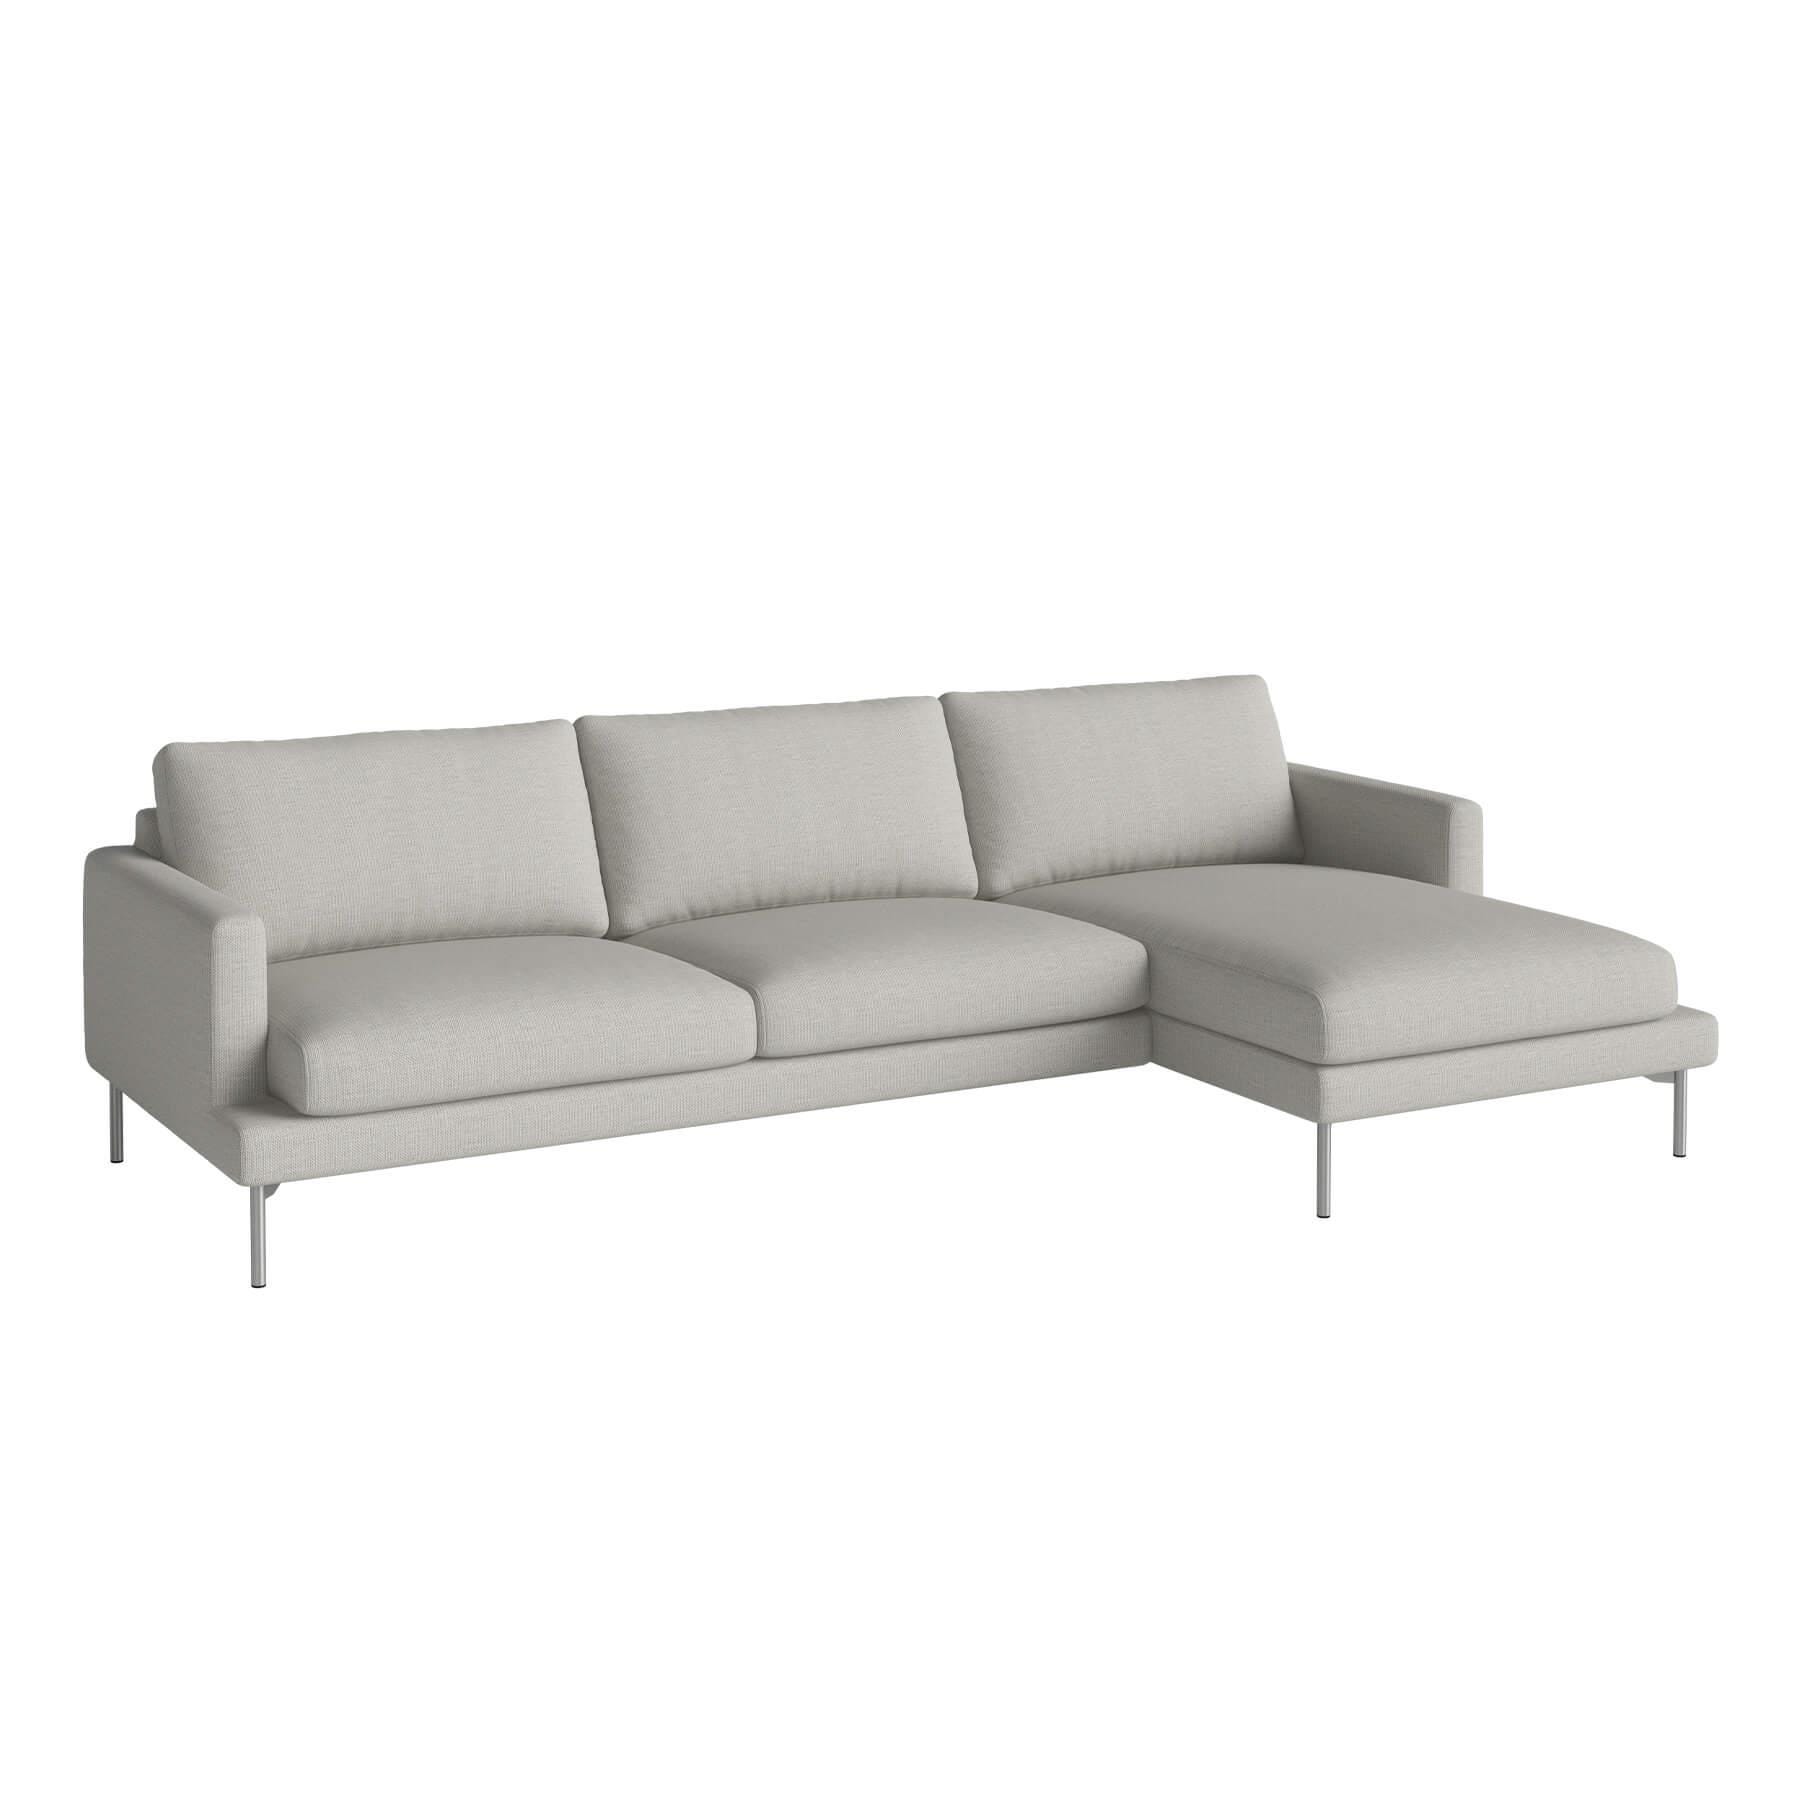 Bolia Veneda Sofa 35 Seater Sofa With Chaise Longue Brushed Steel London Dust Green Right Grey Designer Furniture From Holloways Of Ludlow